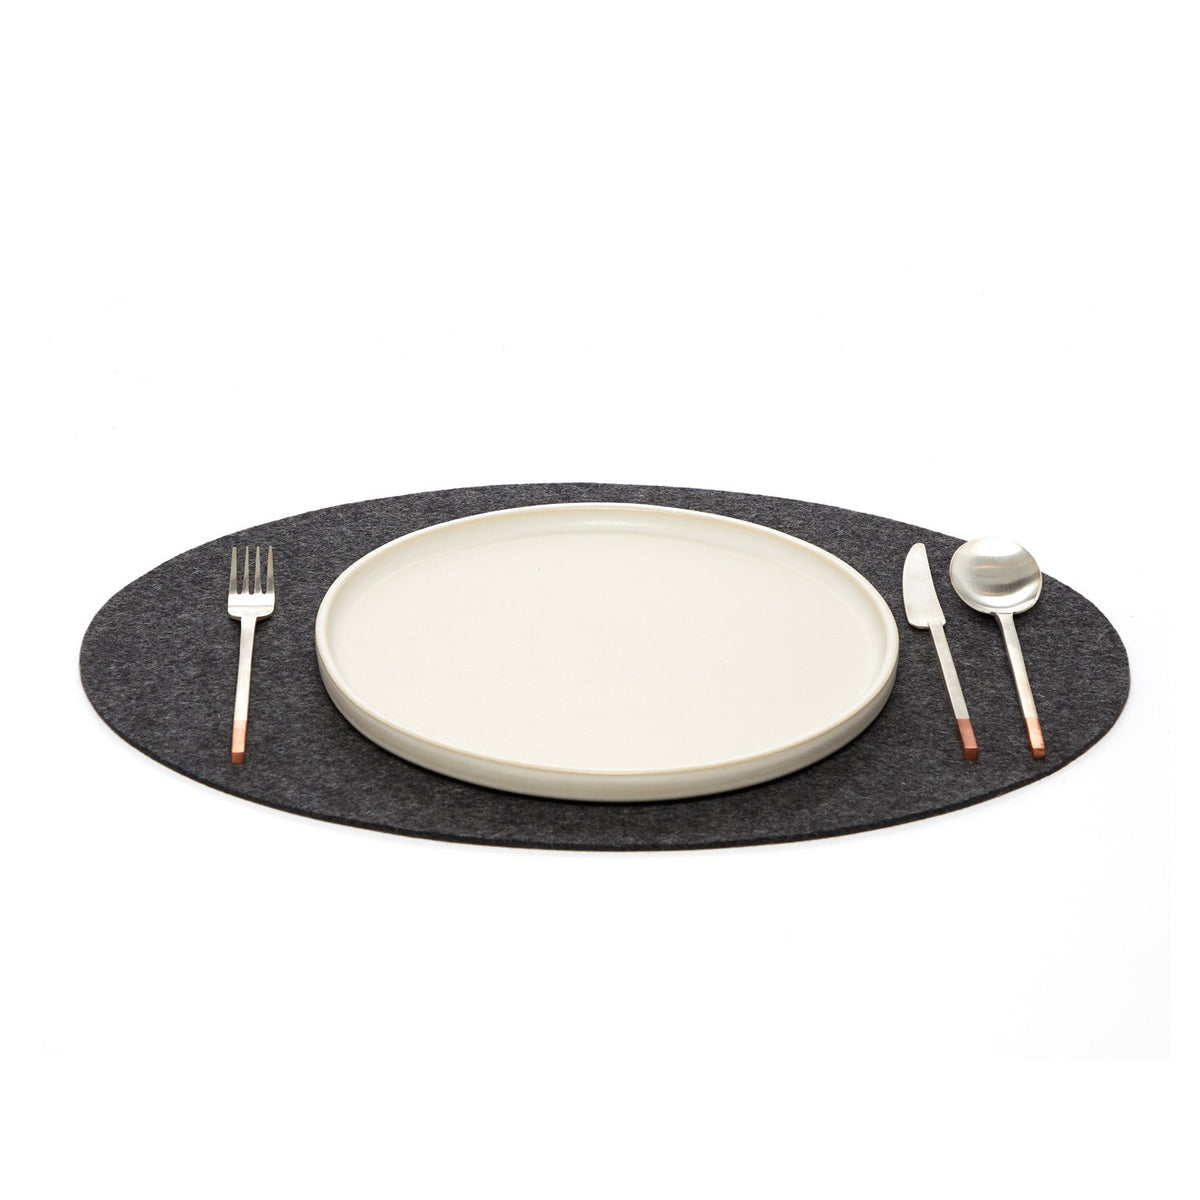 Oval Placemat Felt - Charcoal